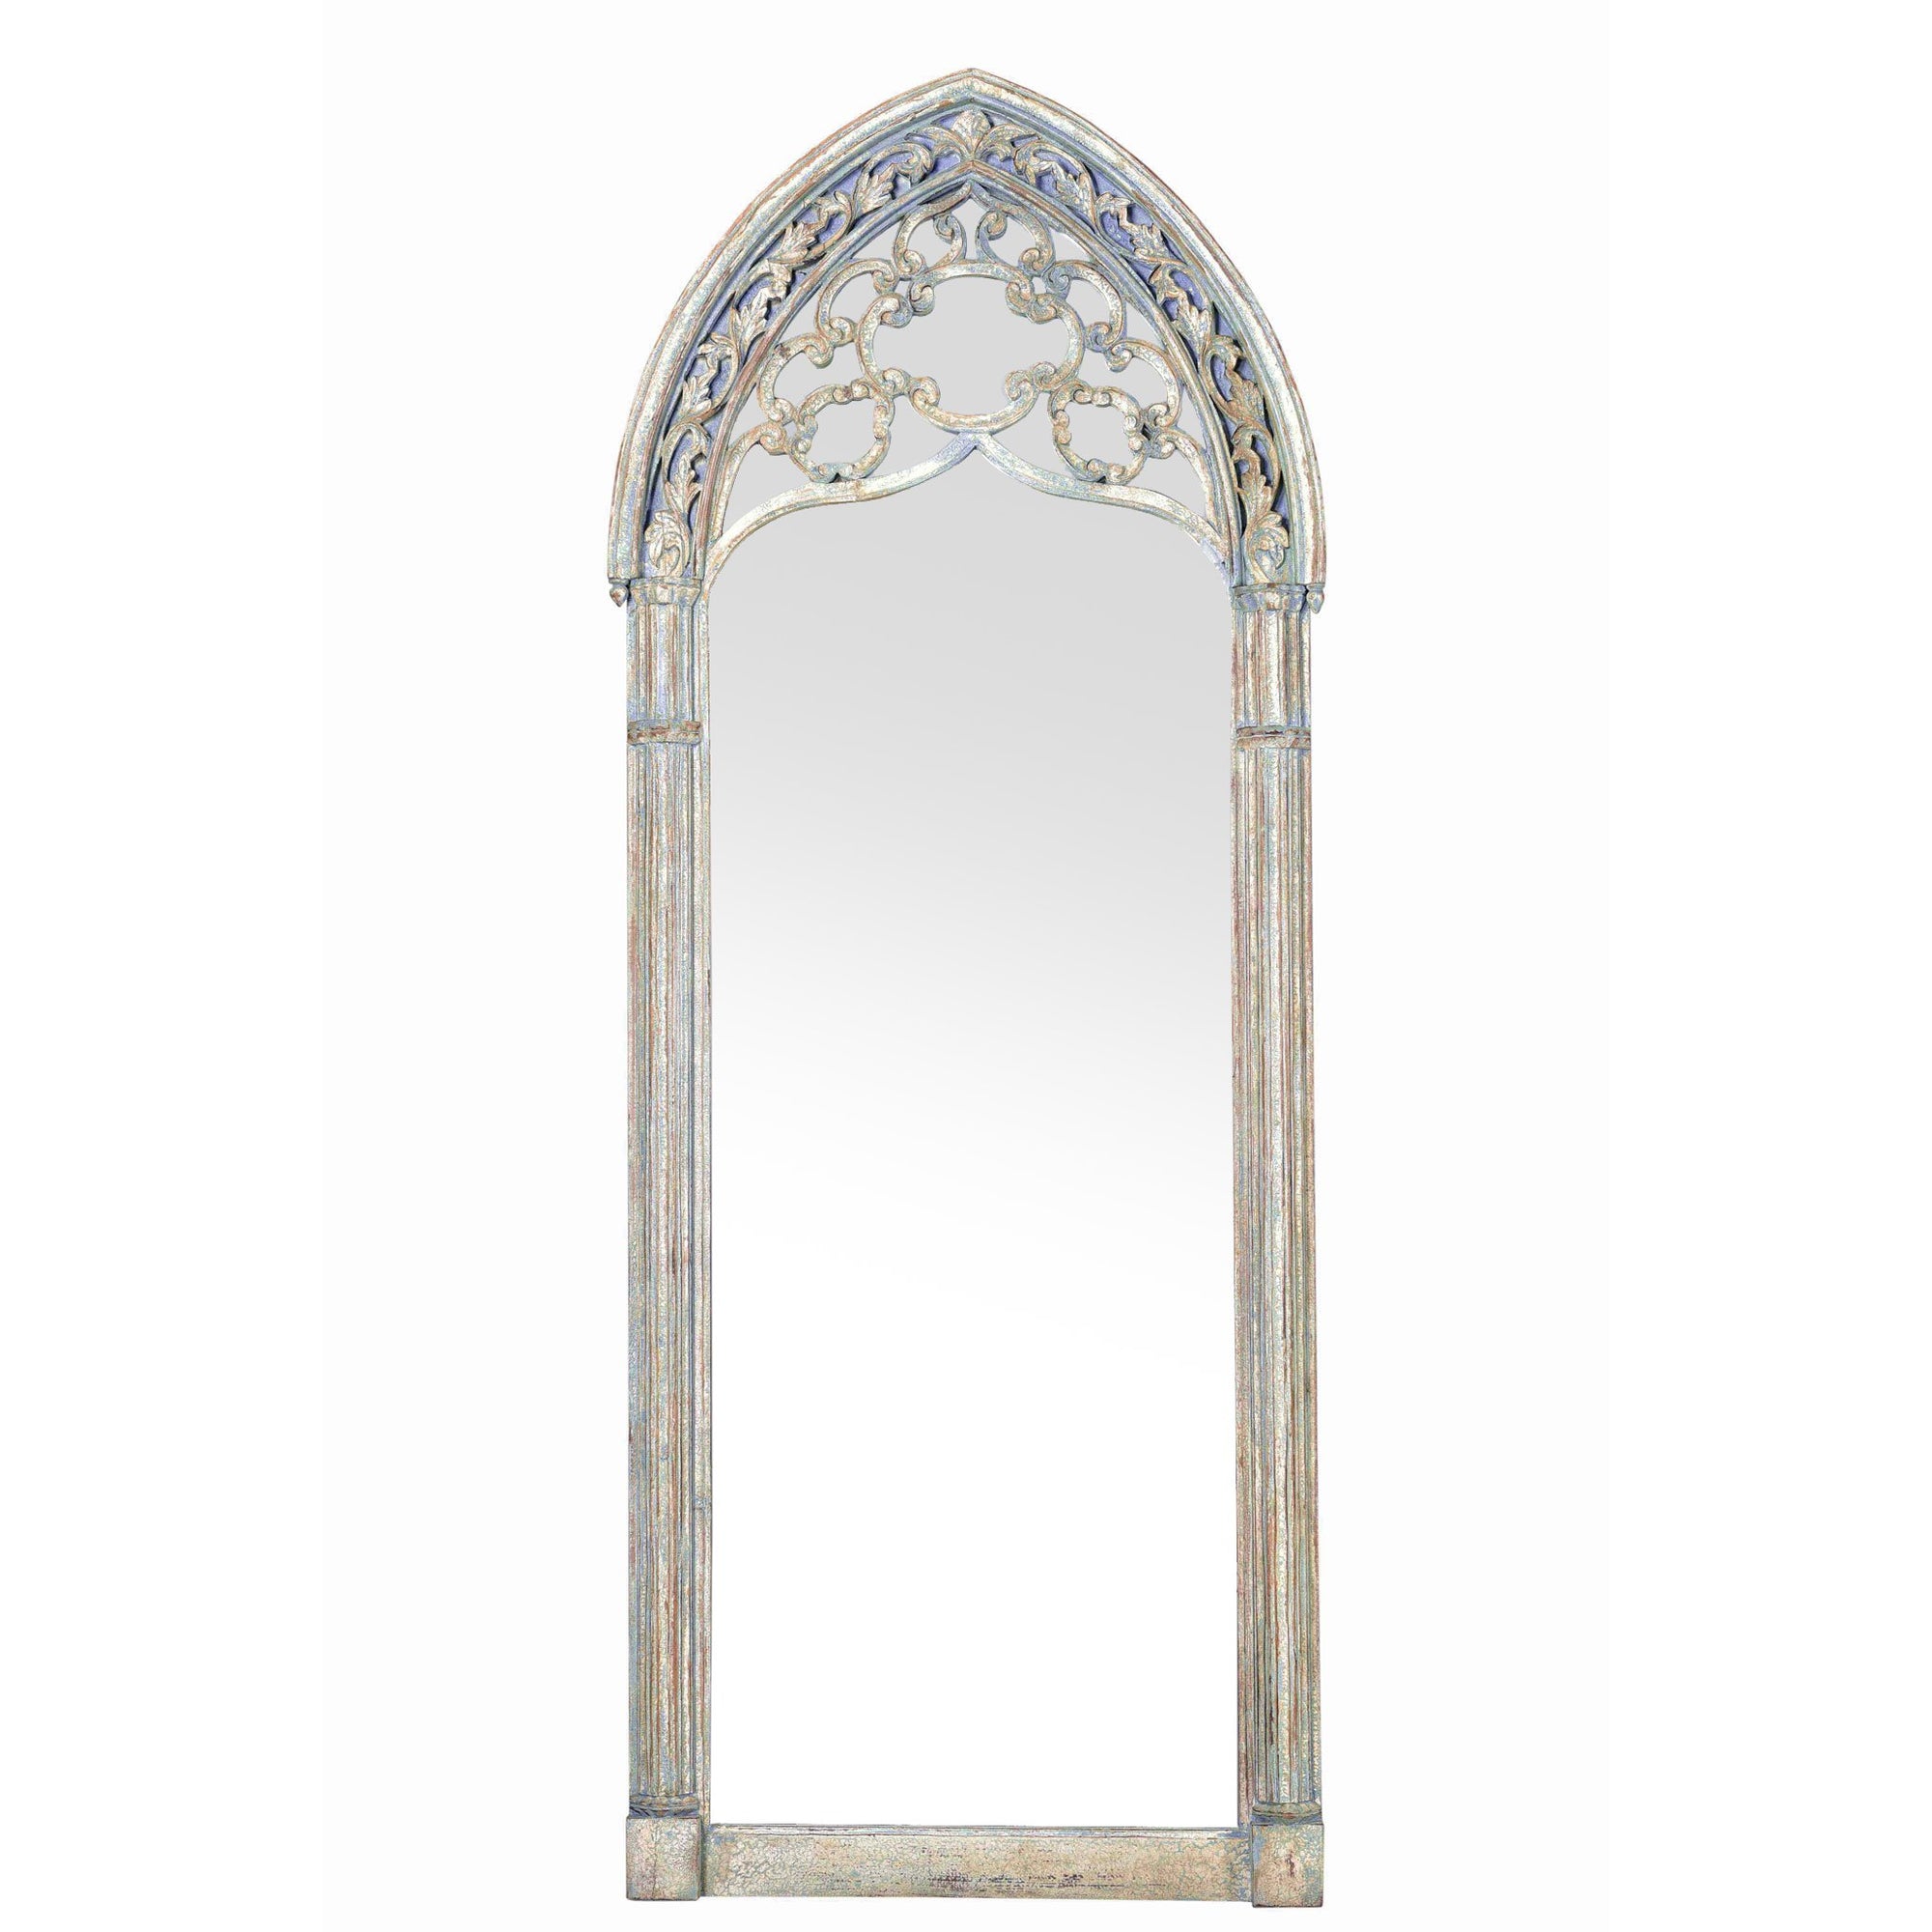 Gothic Style Full Length Floor Standing Mirror - Vintage Indian Blue | Indigo Oriental Antiques